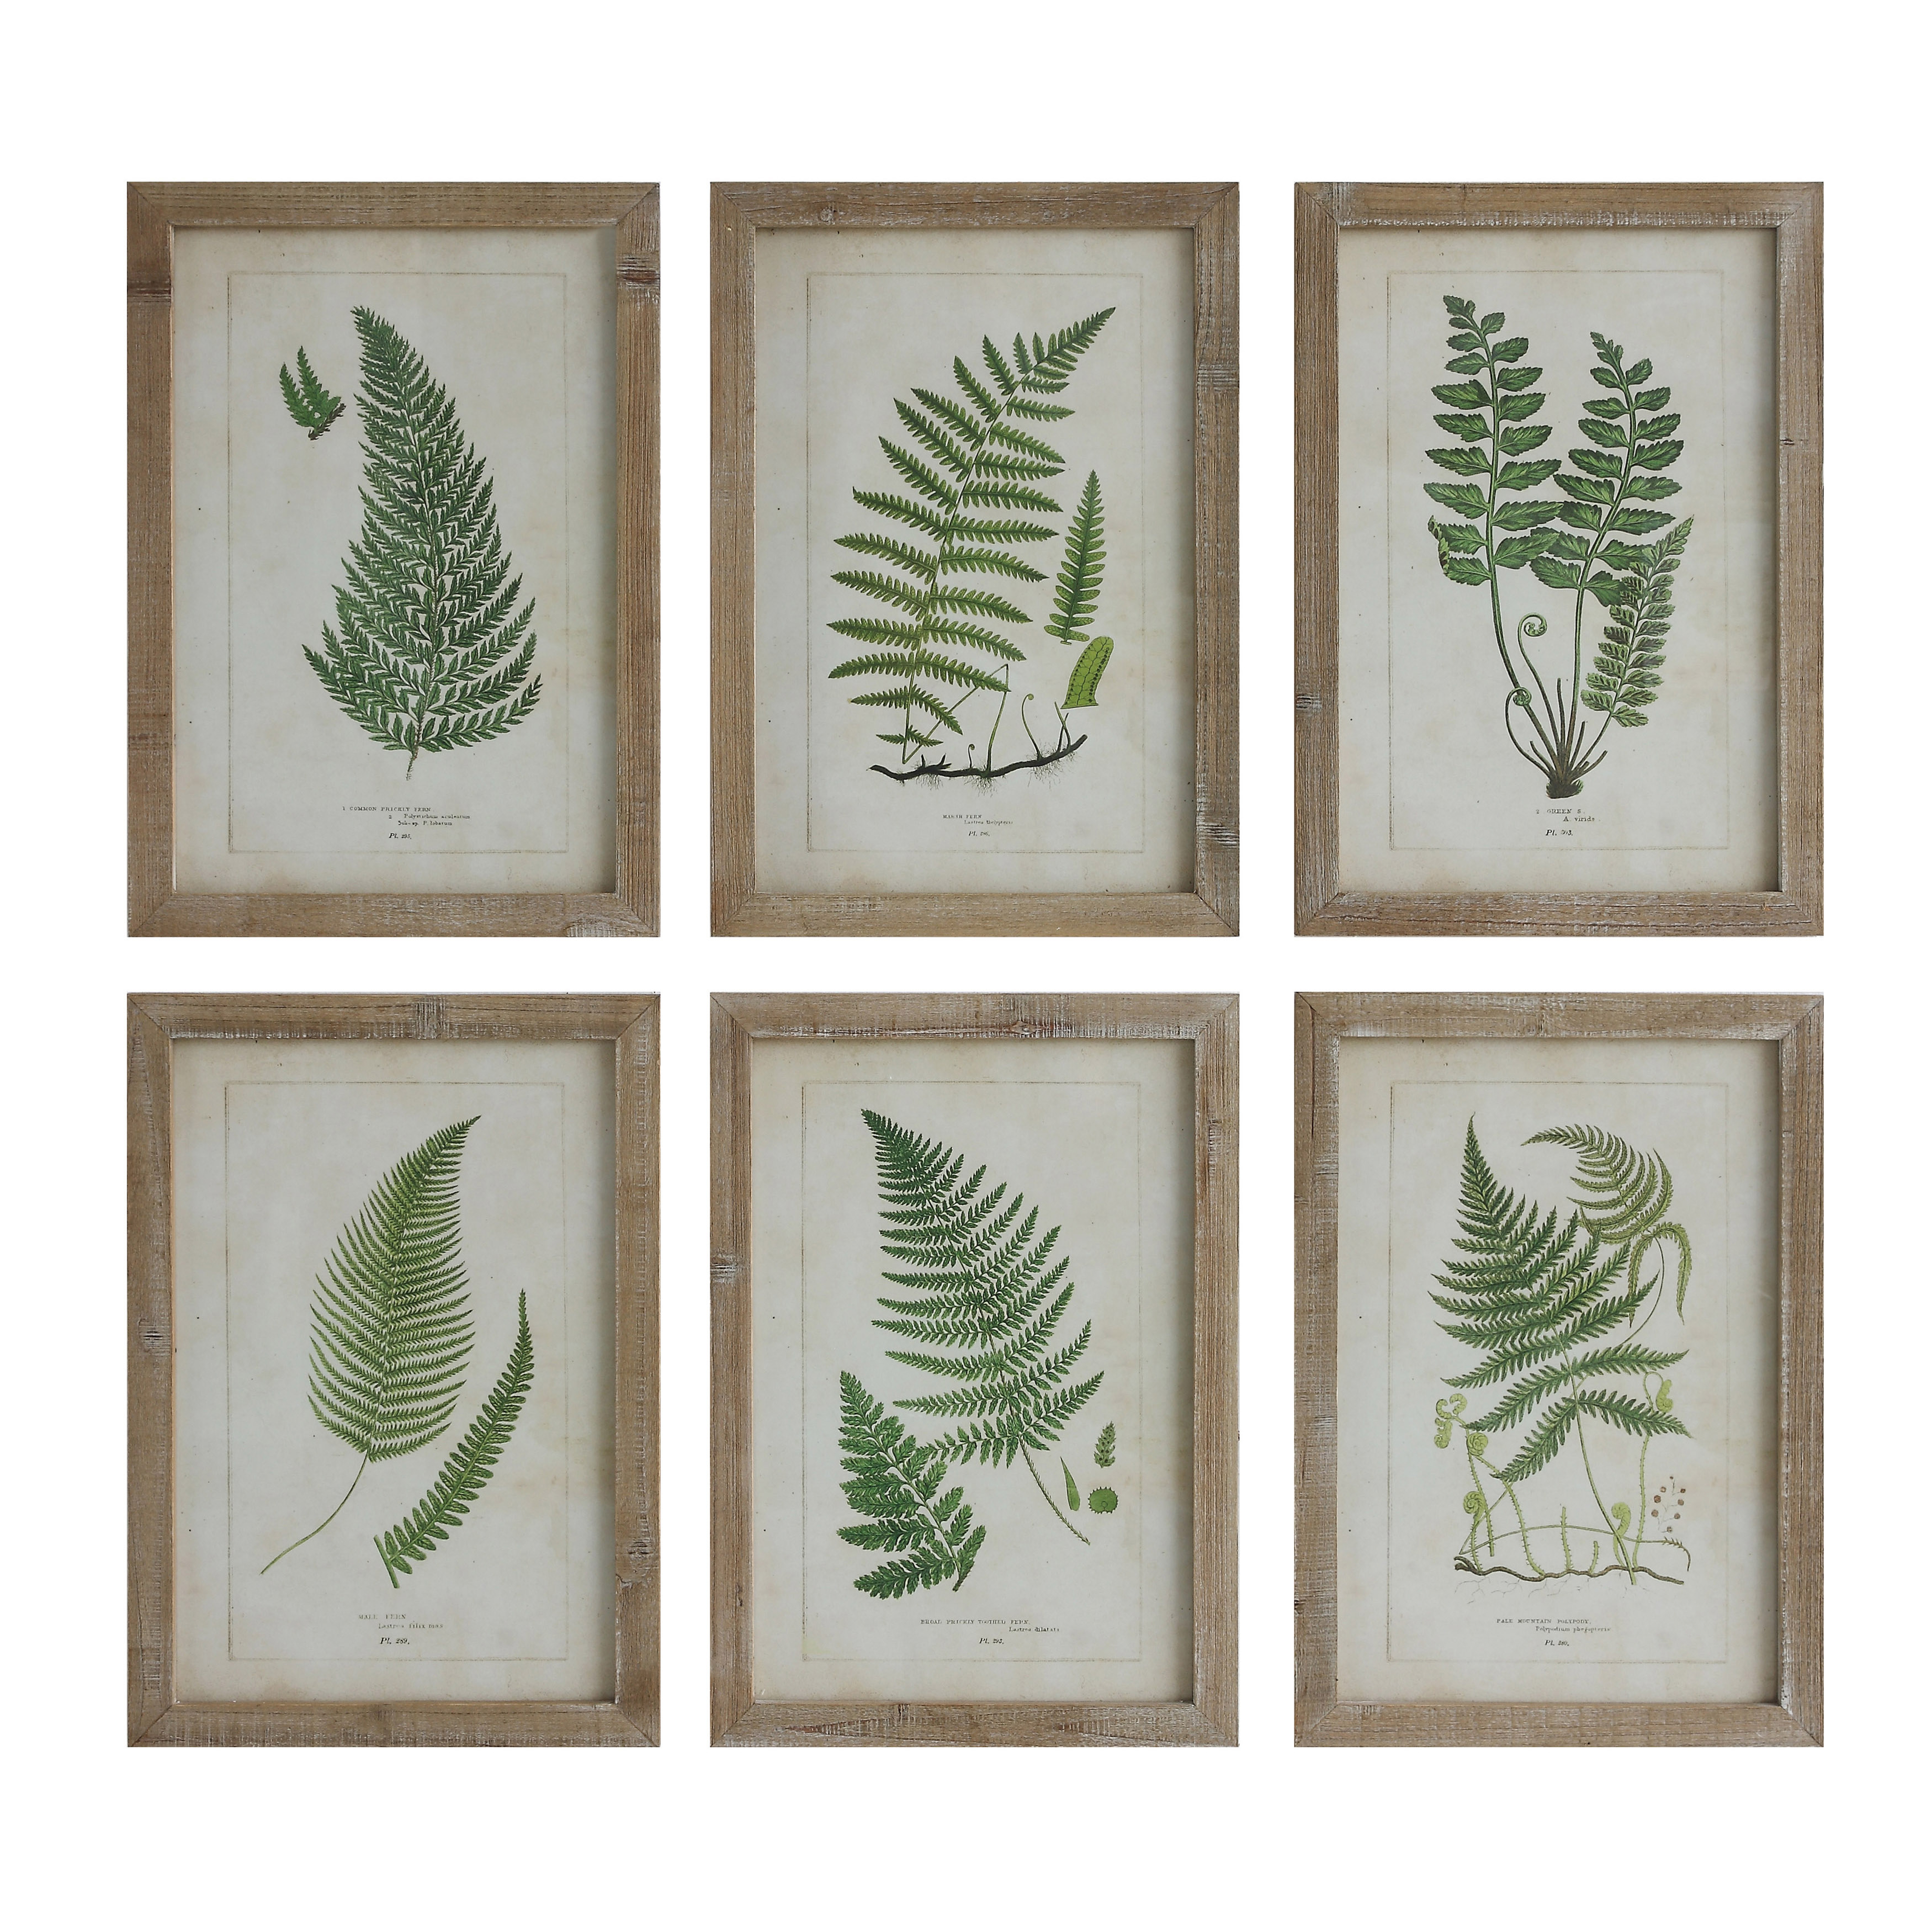 Wood Framed Wall Décor with Fern Fronds (Set of 6 Designs) - Nomad Home